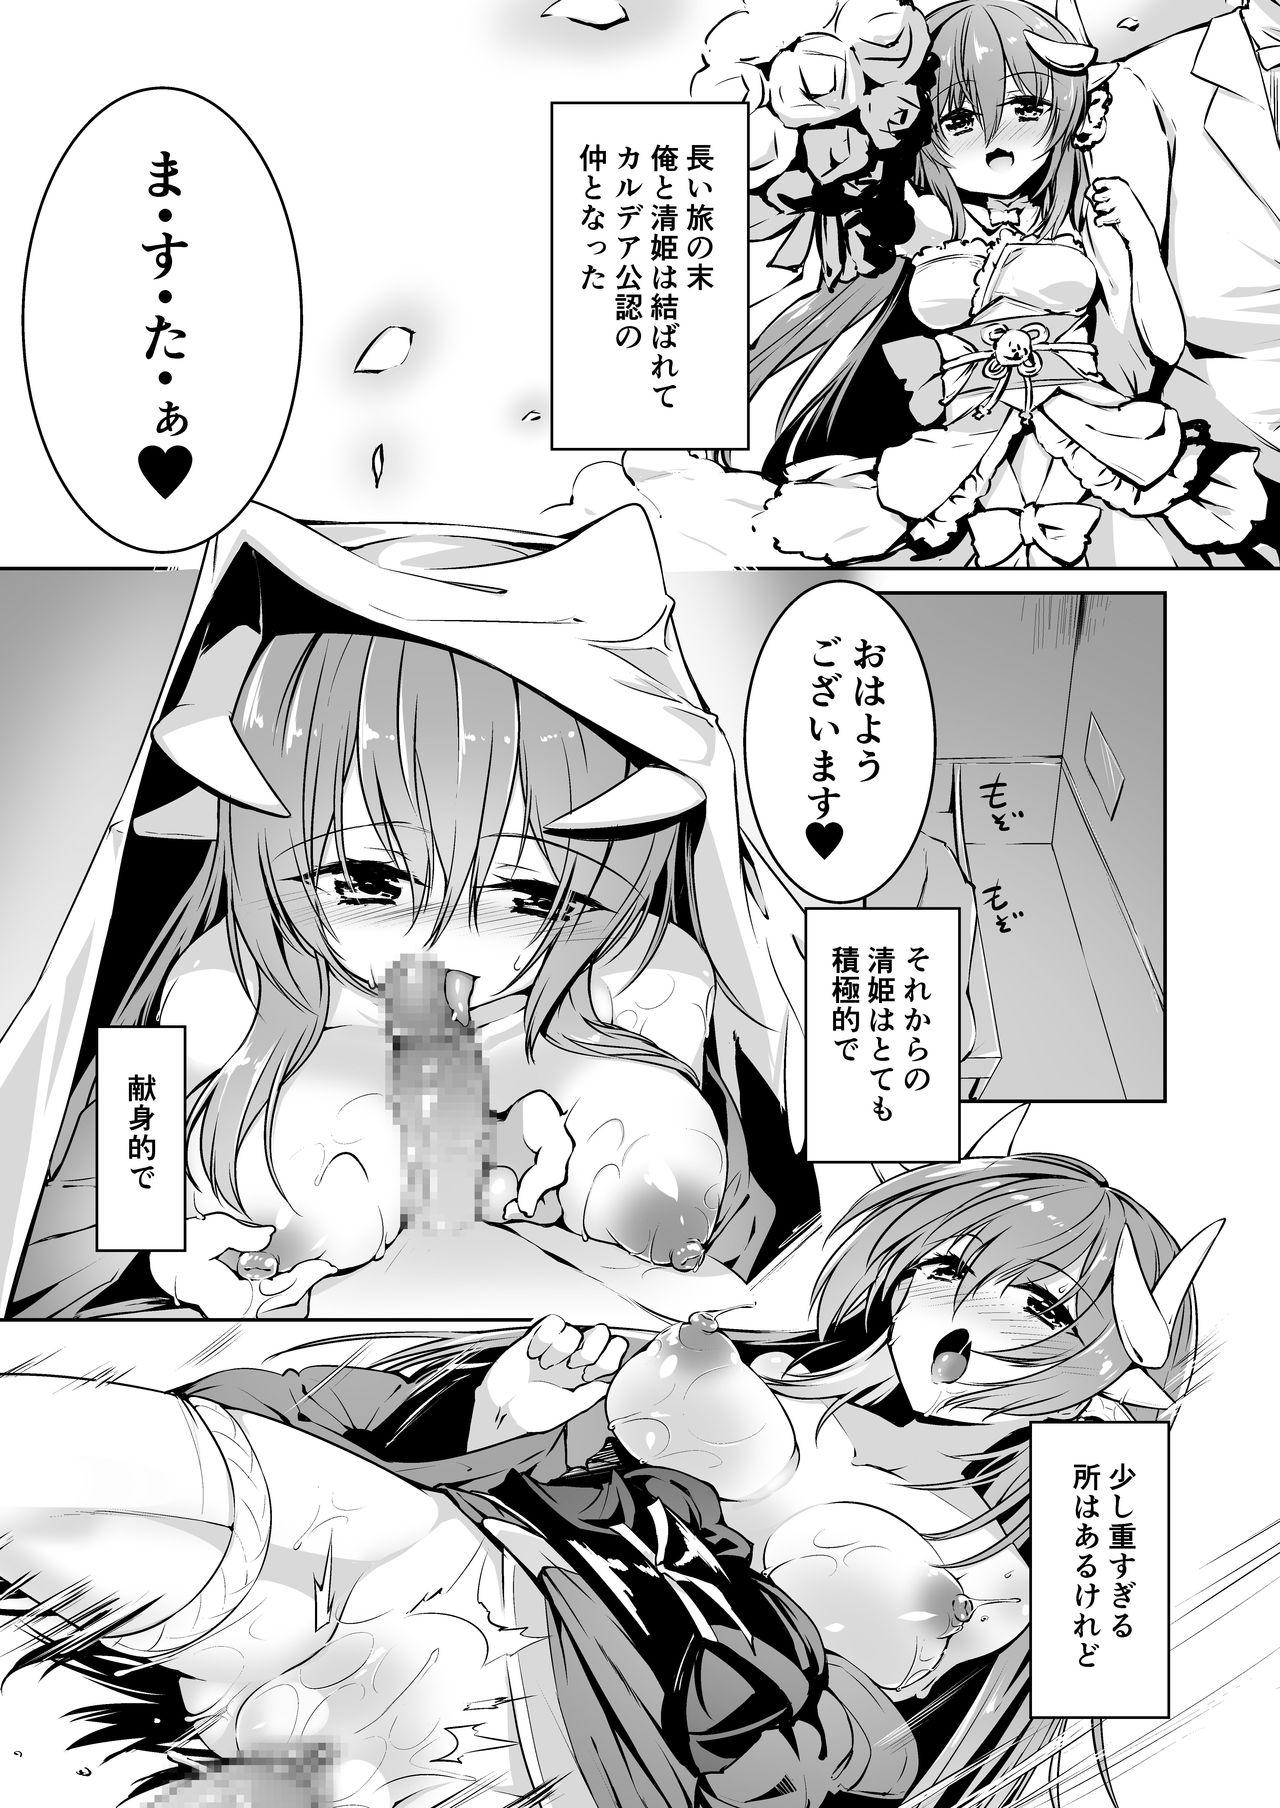 Lez Kiyohime Lovers vol. 02 - Fate grand order Chica - Page 4